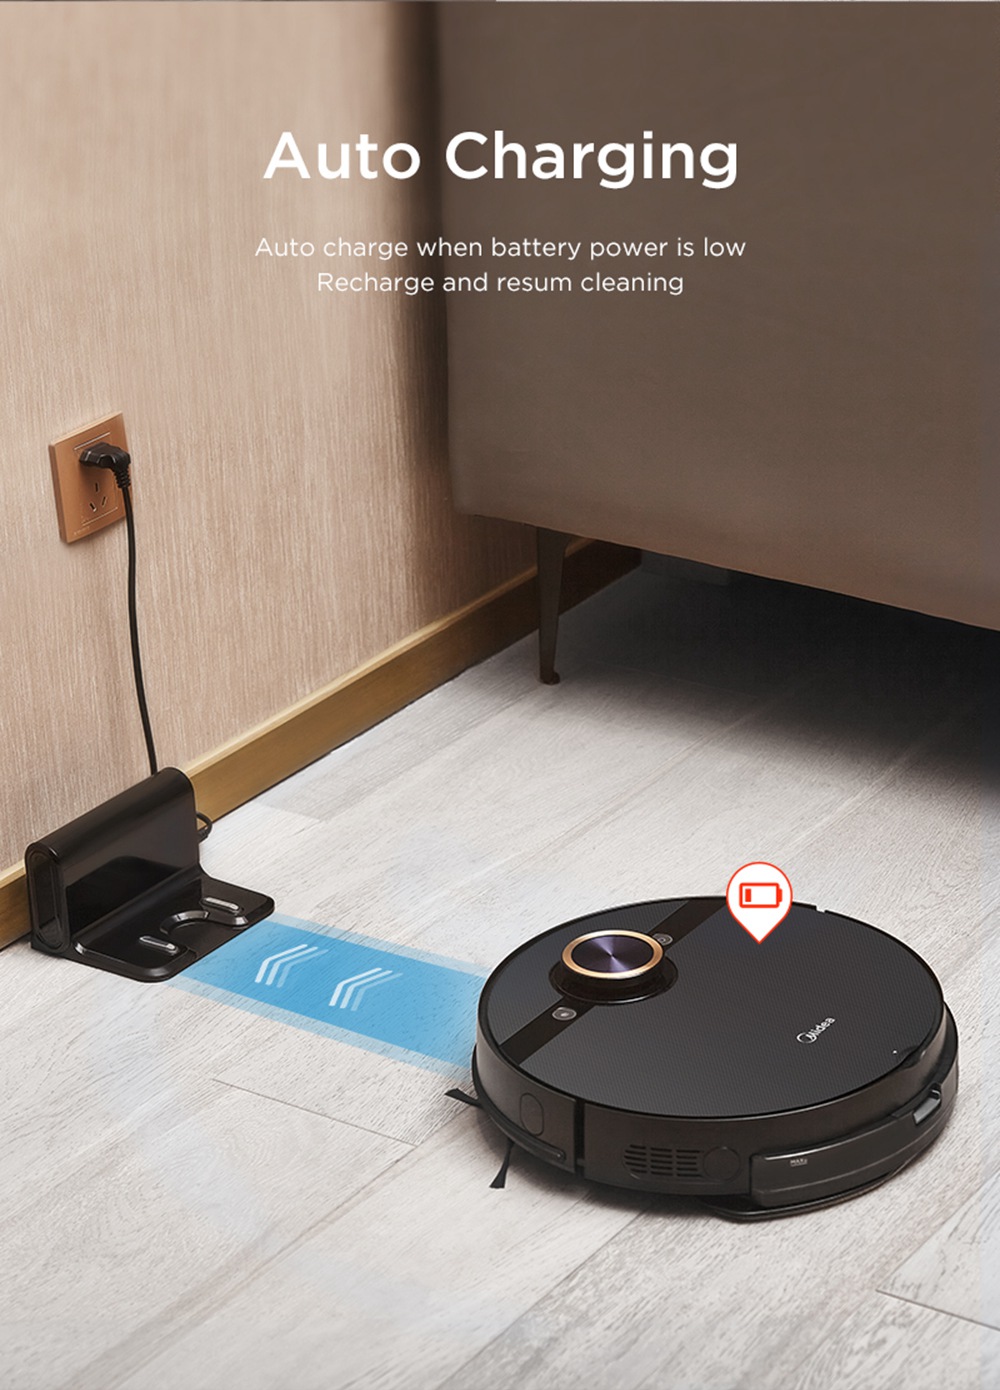 Midea M7 Pro Robot Vacuum Cleaner 4000Pa Strong Suction Vibrating Mopping LDS Navigation 5200mAh Battery 150Mins Runtime APP Intelligent Control - Black